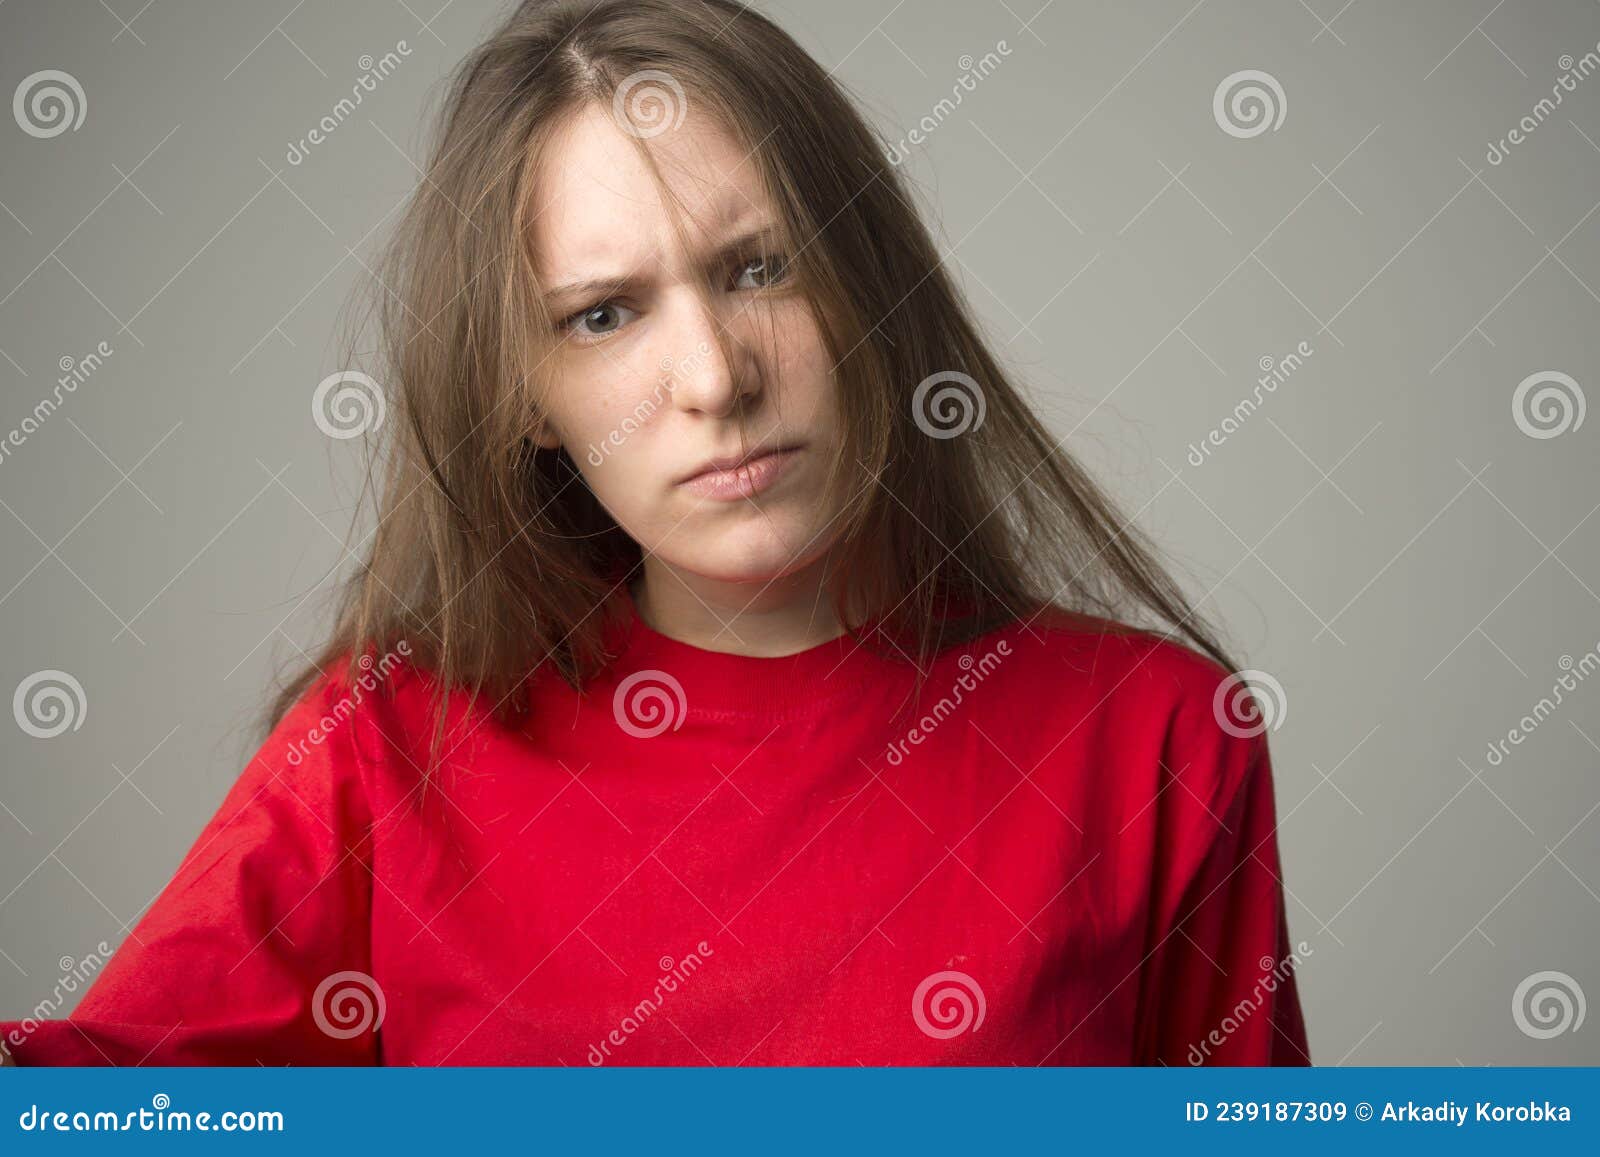 Anger and Rage Concept. Young Expressive Woman Show Her Bad Face. Angry  Nervous Annoyed Girl Portrait. Human Full of Negative Emot Stock Image -  Image of human, conflict: 239187309